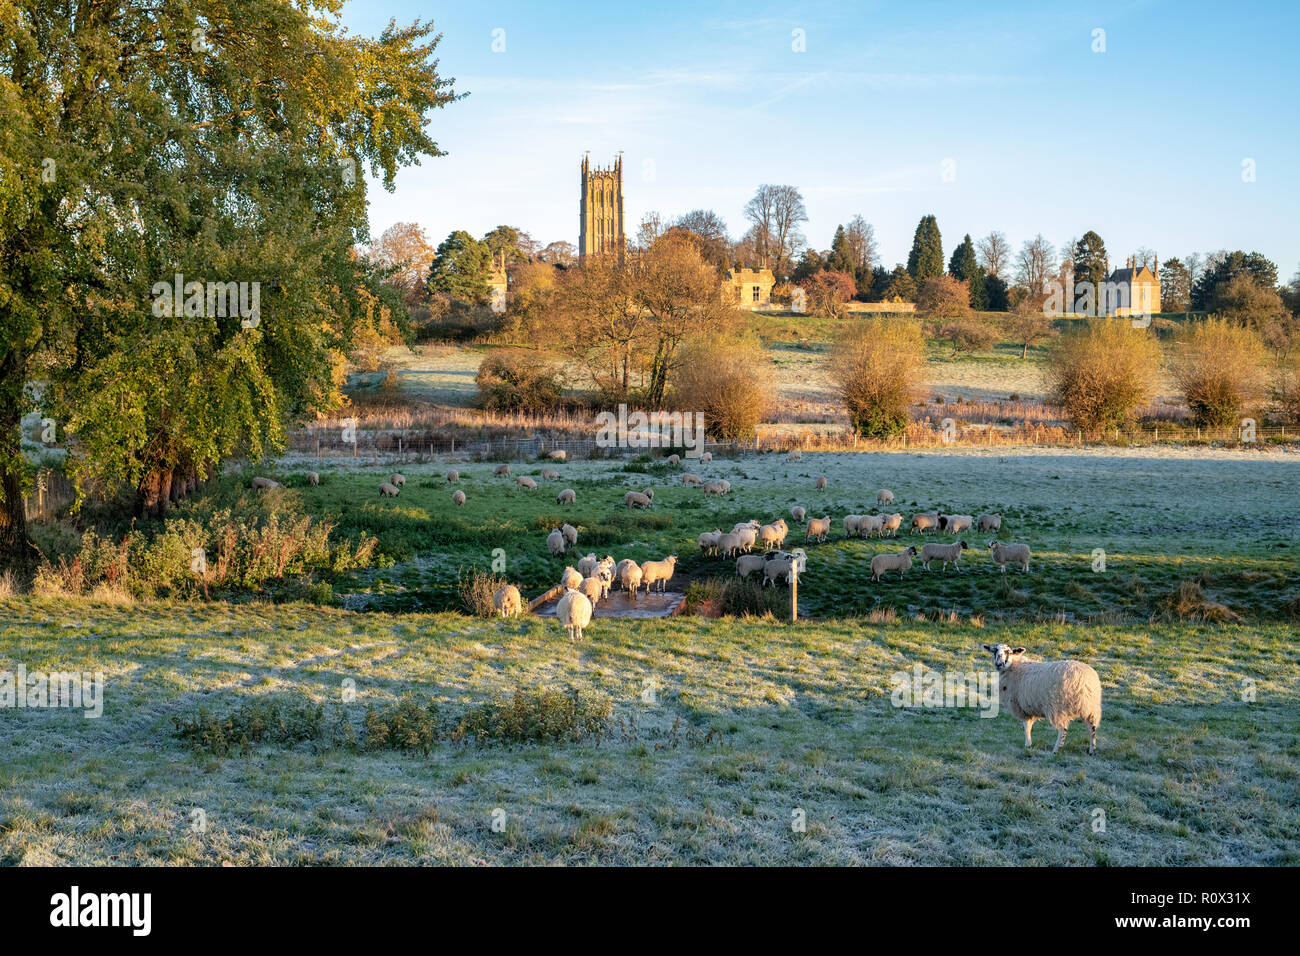 Sheep on a bridge crossing a stream infront of East Banqueting House and Saint James Church in the autumn at sunrise. Chipping Campden, Cotswolds, UK Stock Photo